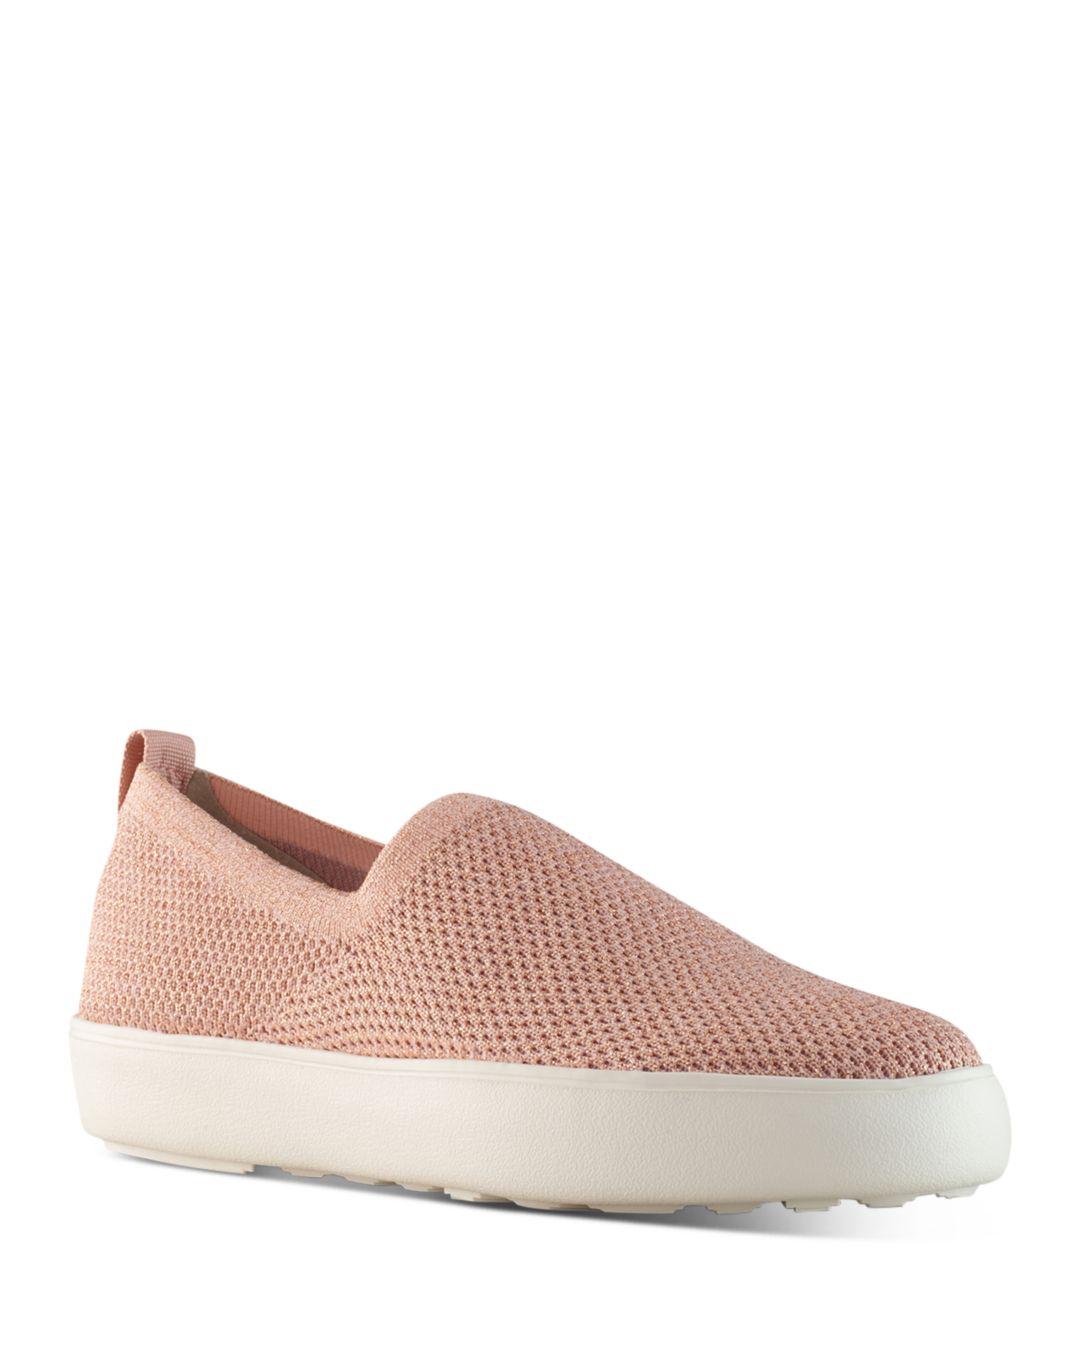 Cougar Shoes Hint Stretch Slip On Platform Sneakers in Pink | Lyst